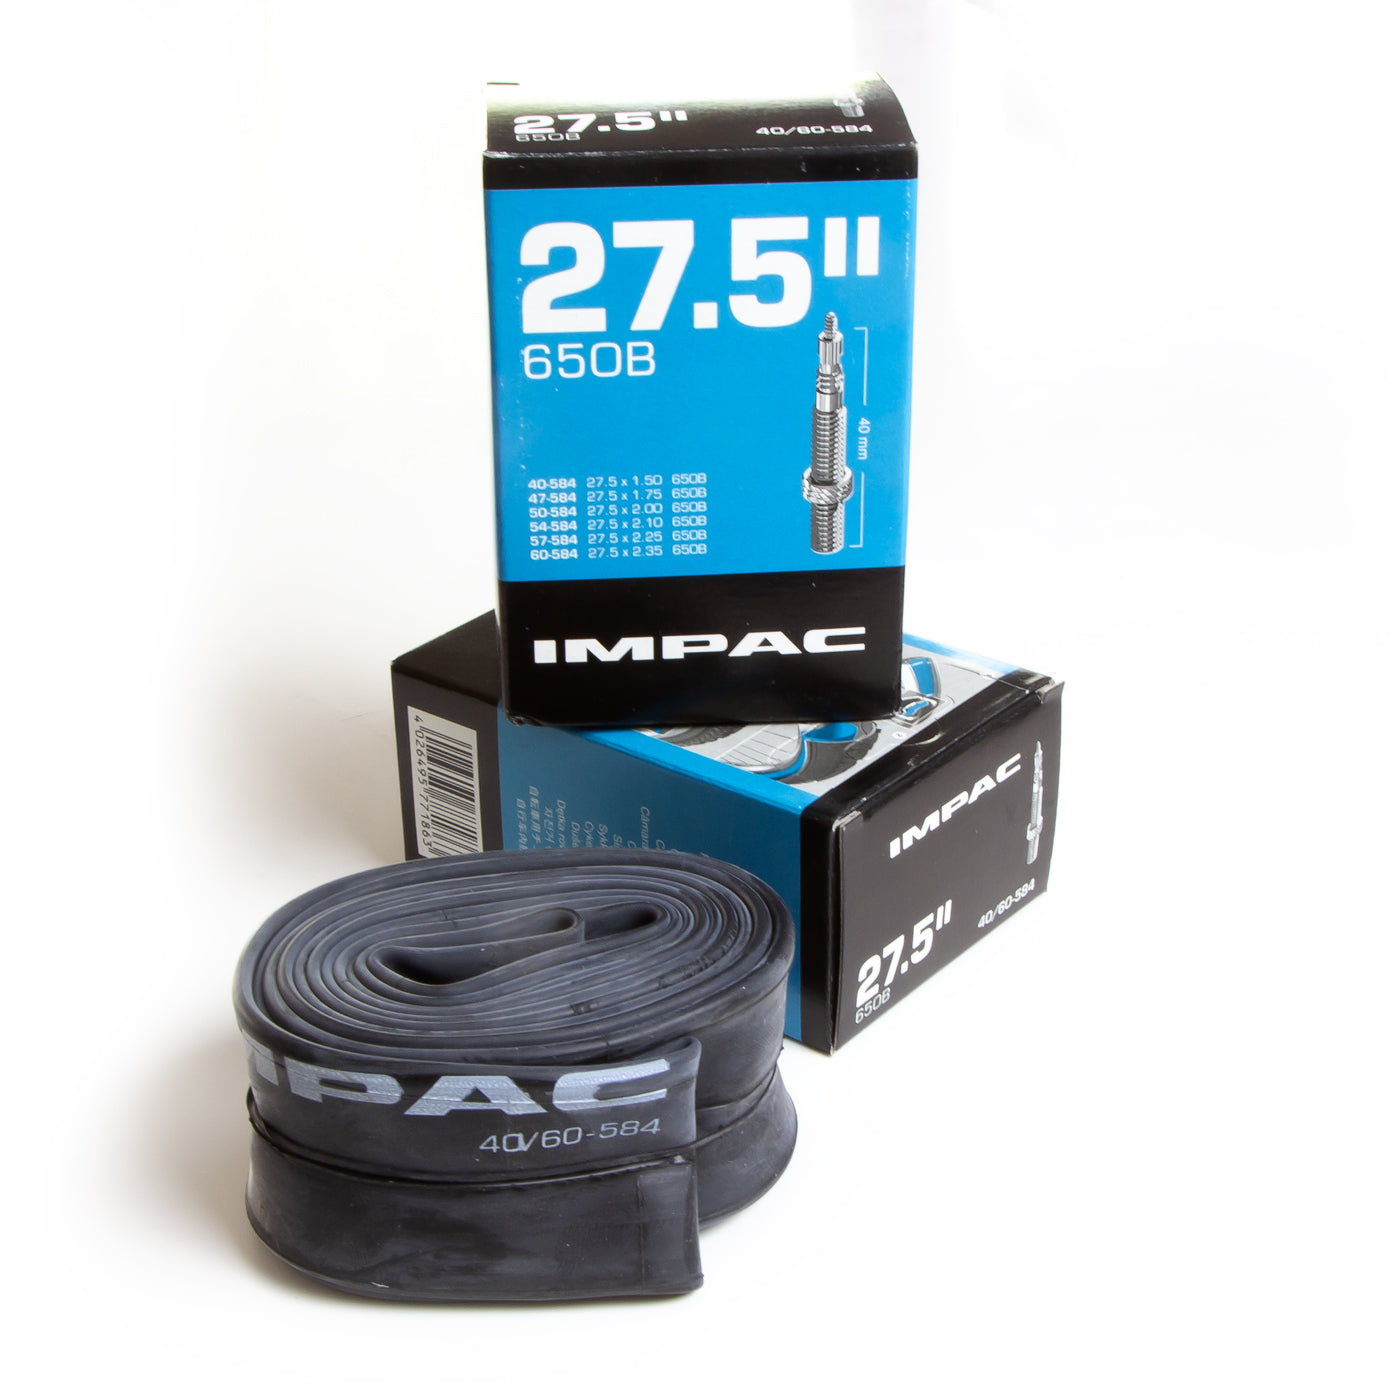 View 275 Inner Tubes 2 Pack information